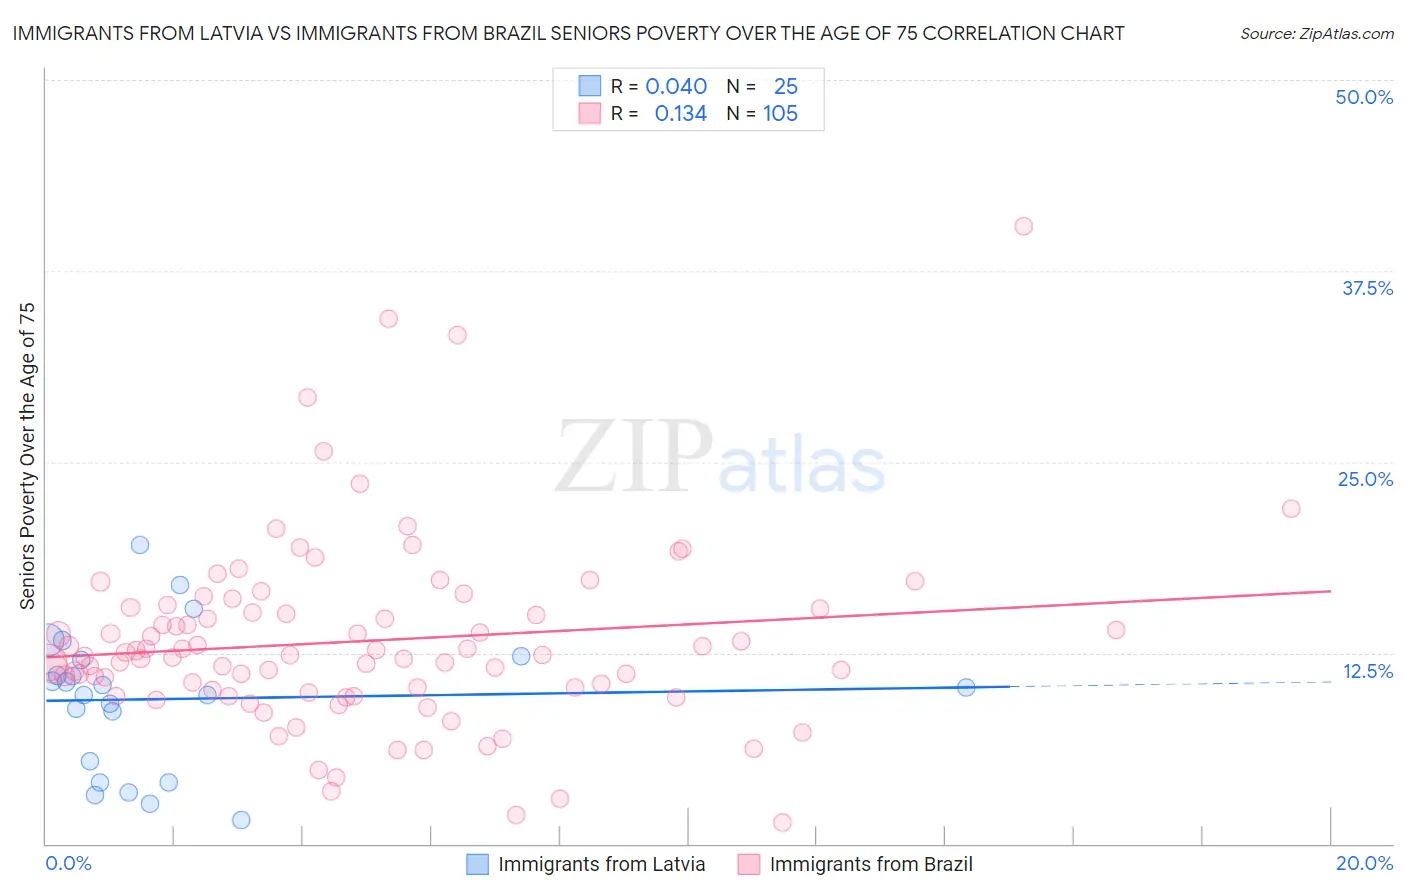 Immigrants from Latvia vs Immigrants from Brazil Seniors Poverty Over the Age of 75